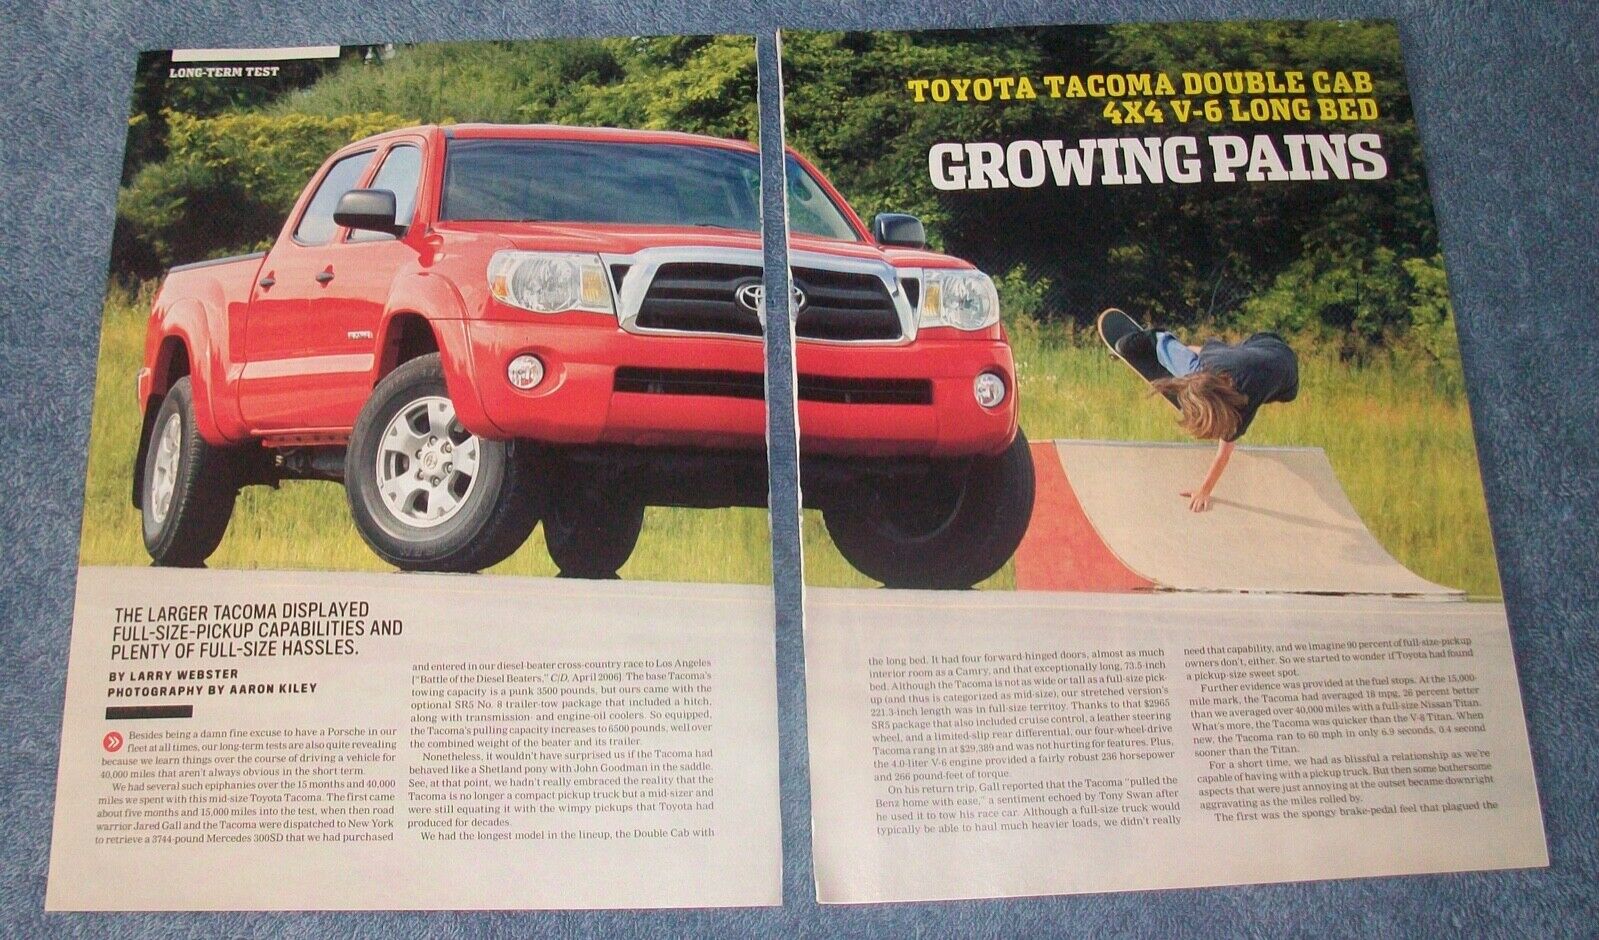 2005 Toyota Tacoma Doble Cab 4x4 V6 Long Bed Long-Term Test Info Article